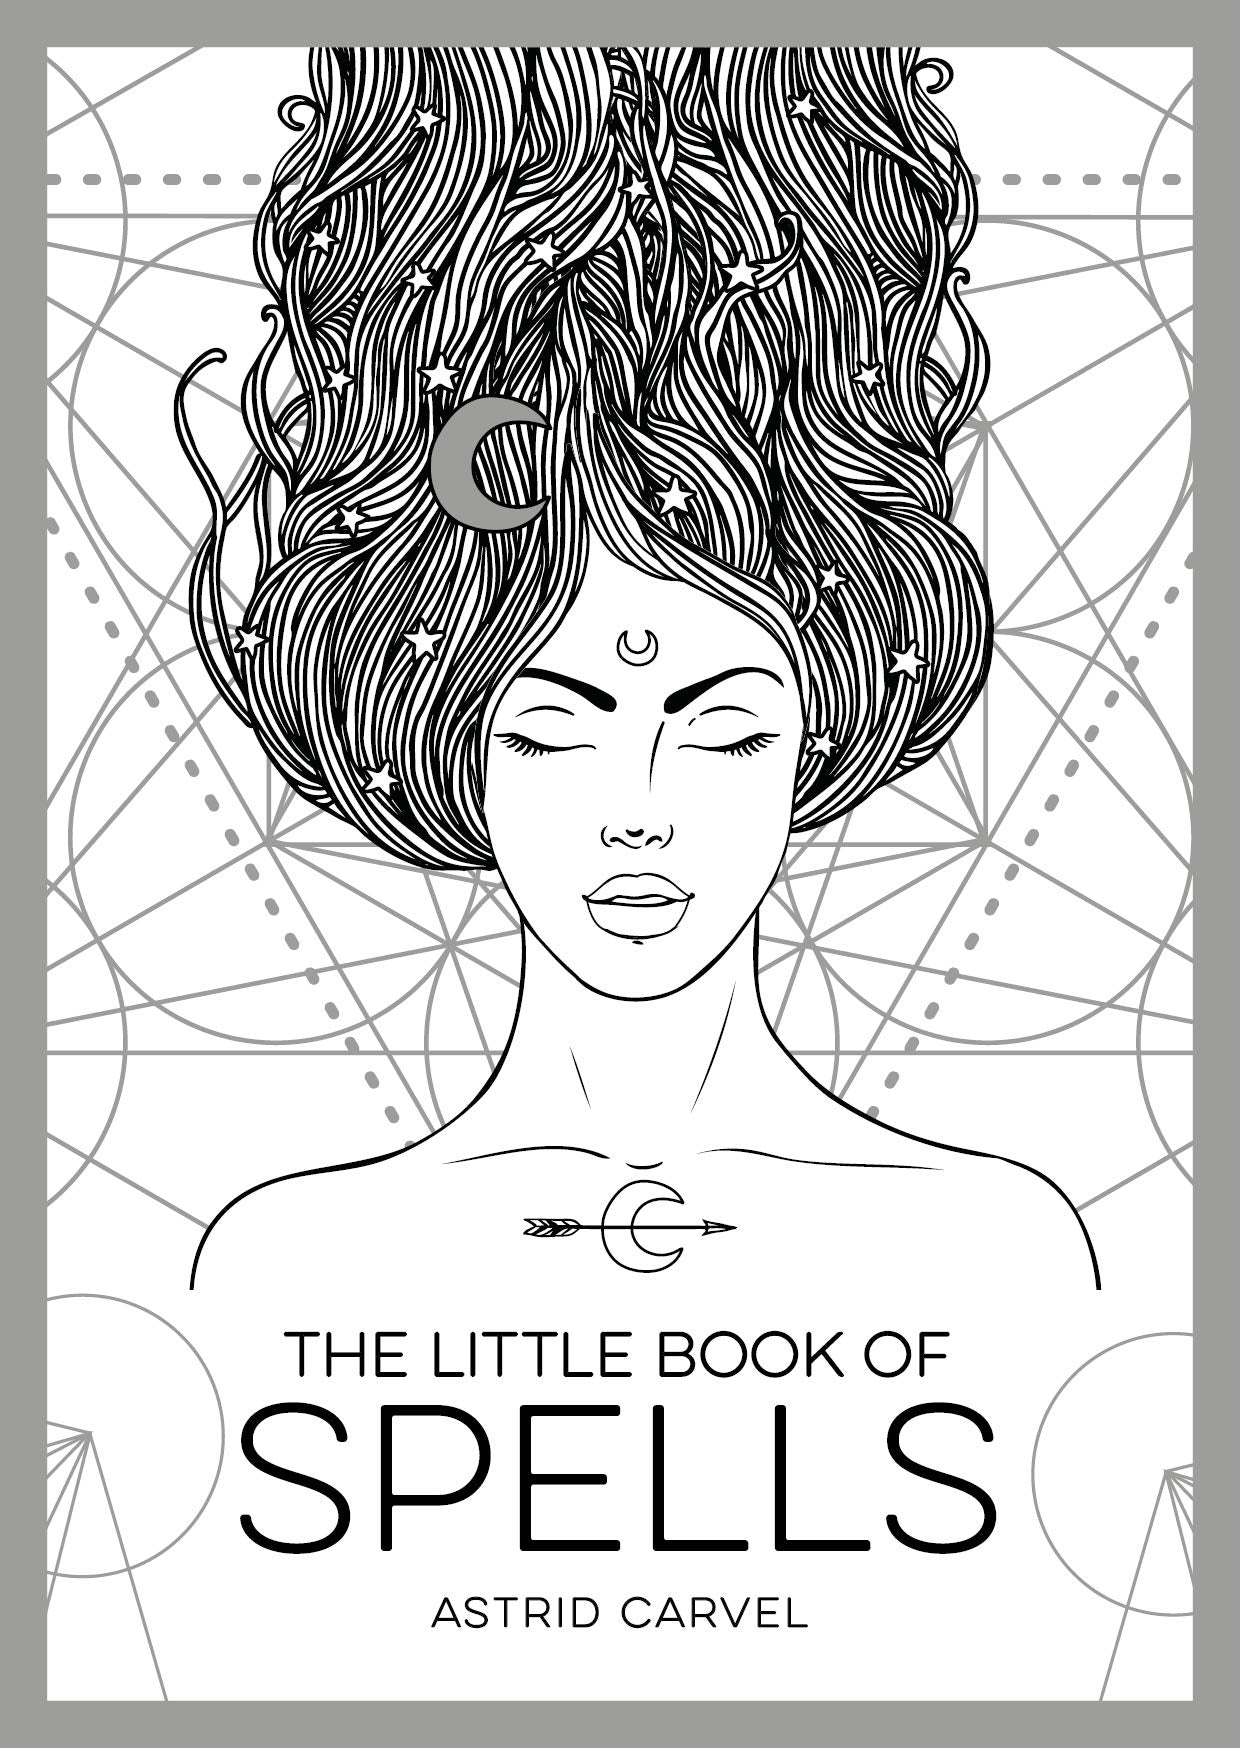 Little Book of Spells - An Introduction to White Witchcraft